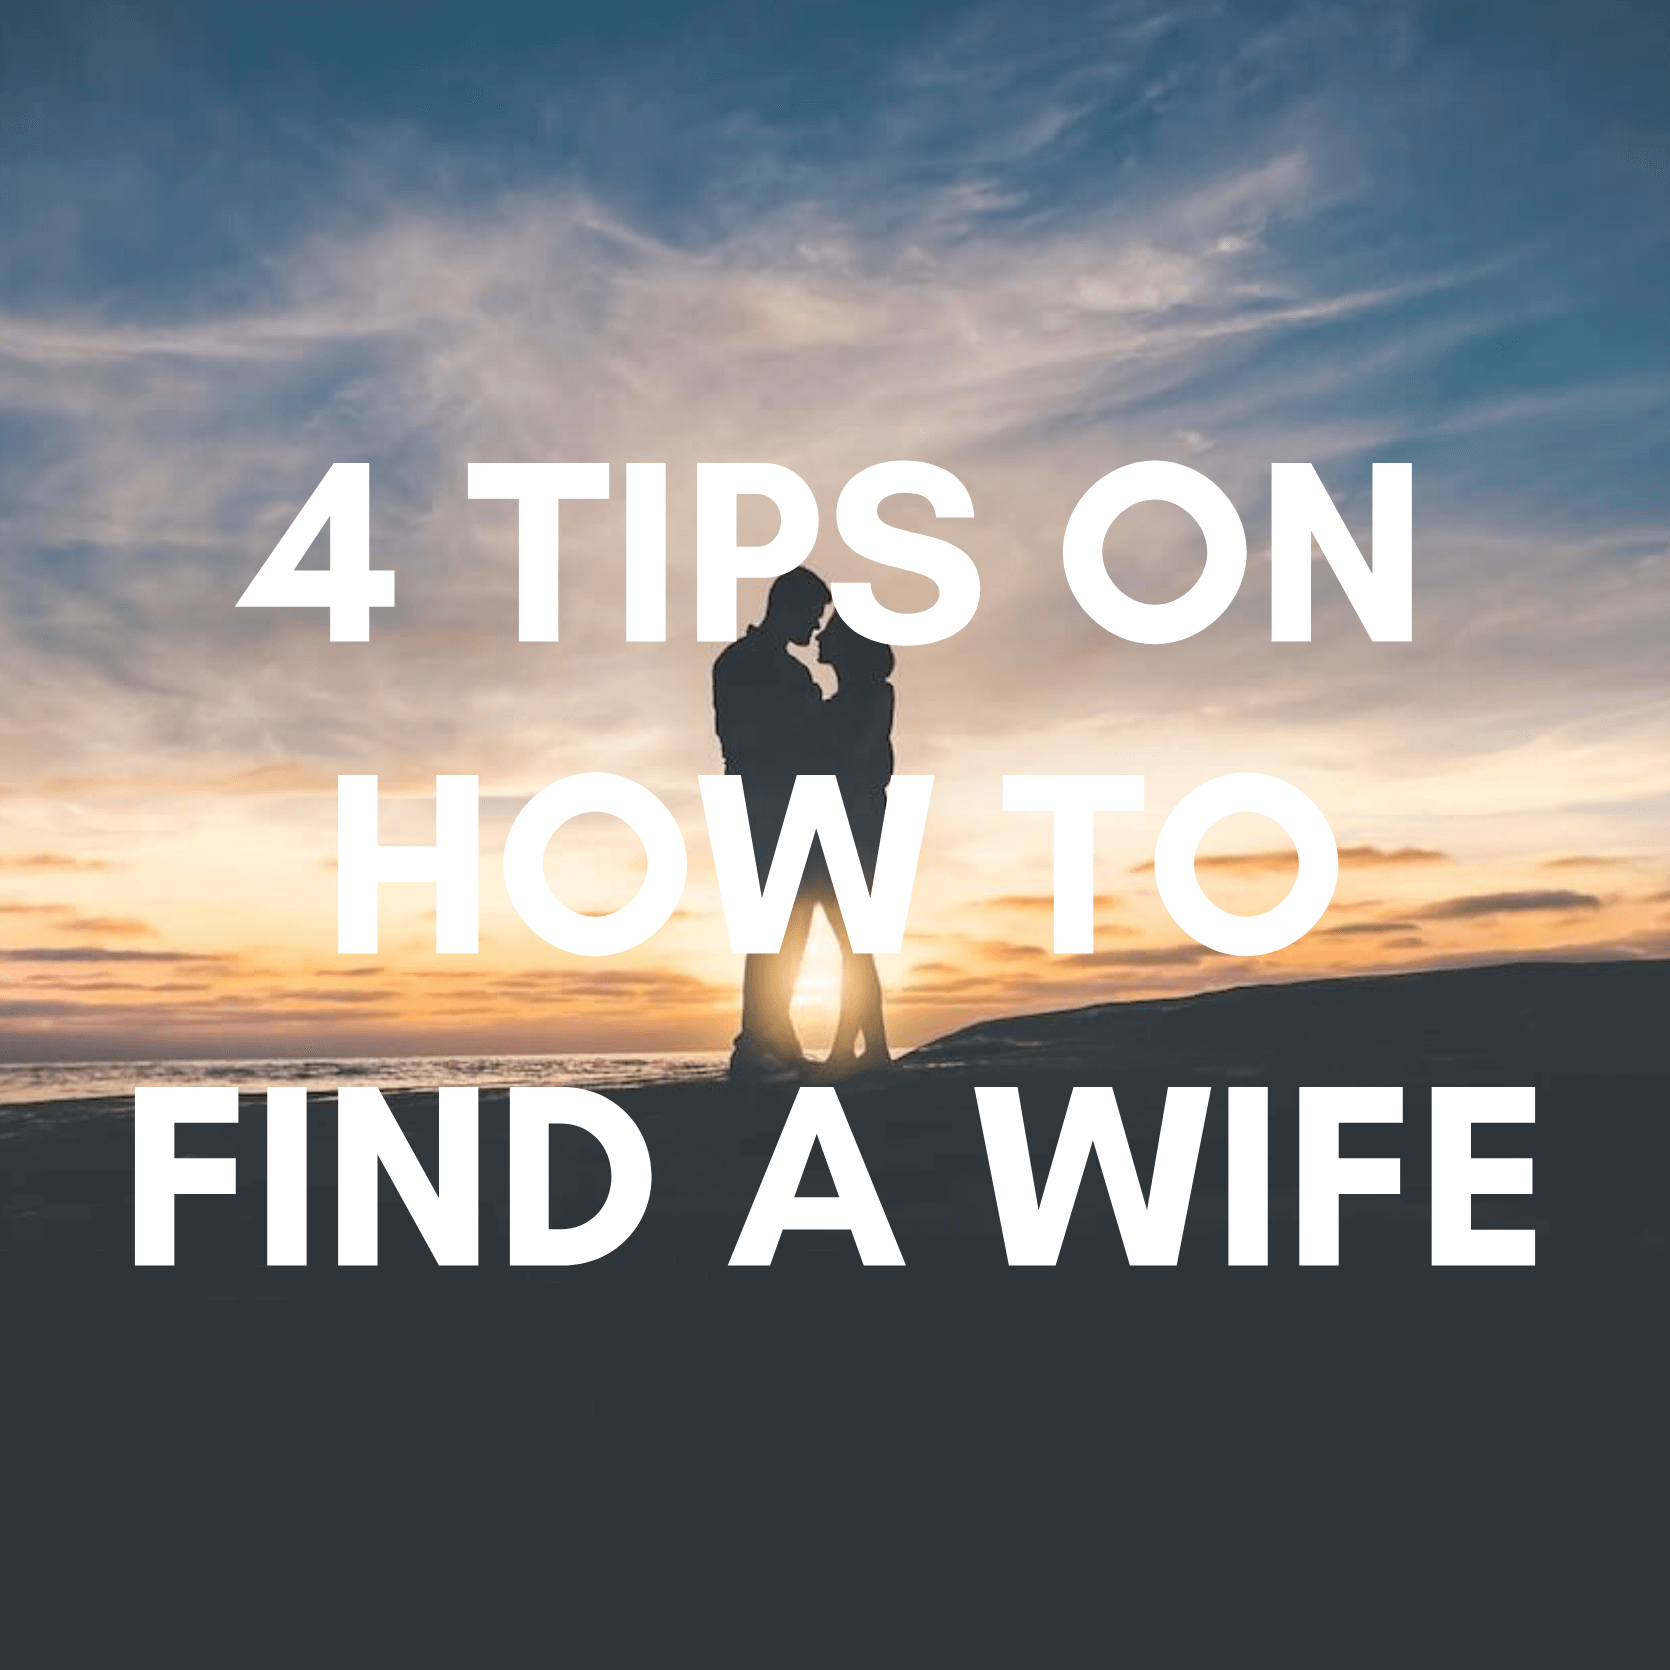 Jhh 003 4 Tips On Finding A Wife 8019